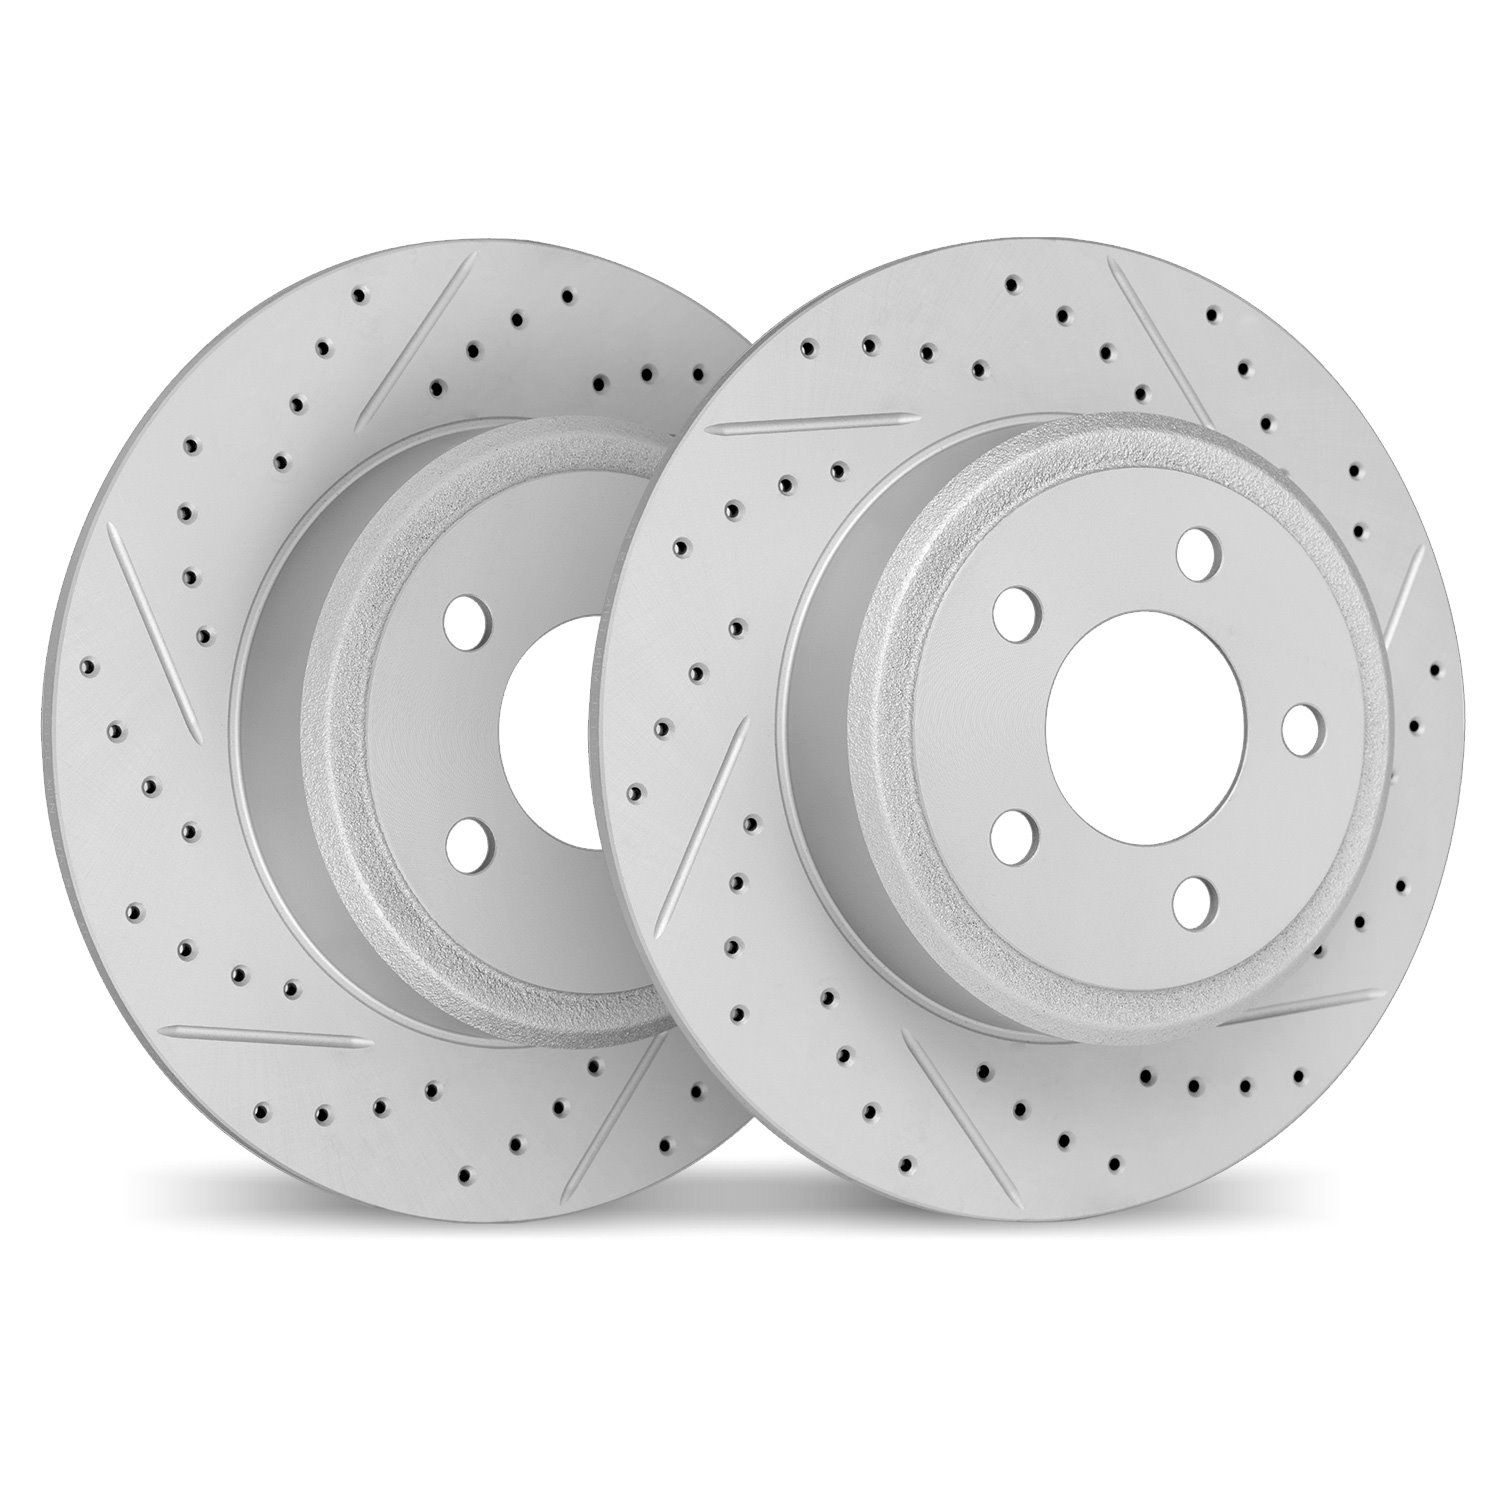 2002-54133 Geoperformance Drilled/Slotted Brake Rotors, Fits Select Ford/Lincoln/Mercury/Mazda, Position: Rear